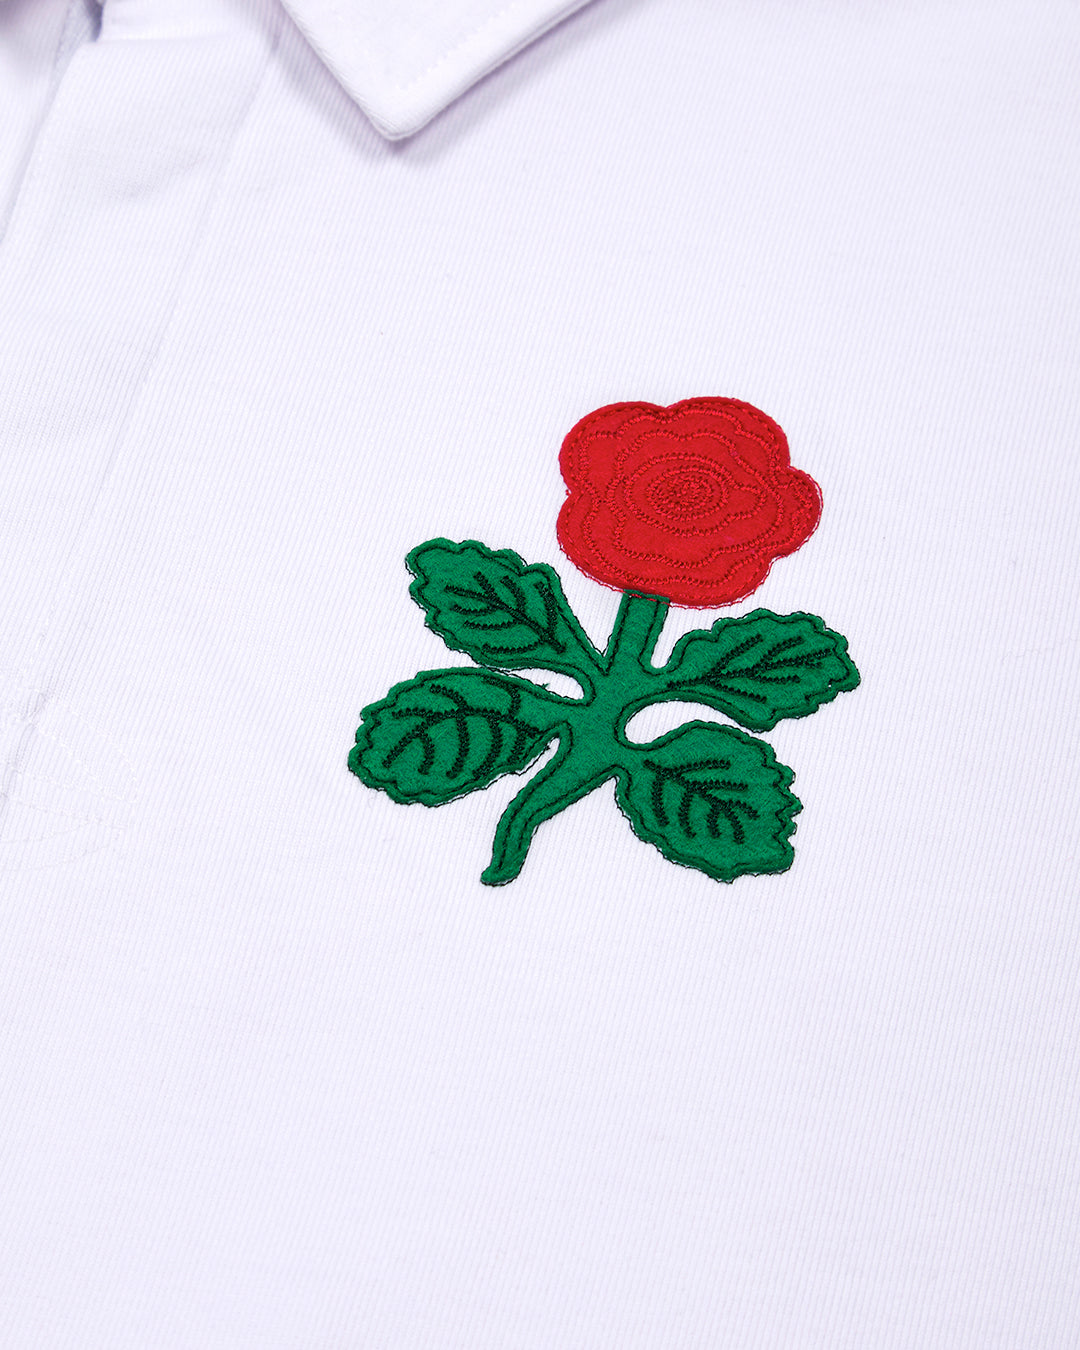 VC: GB-ENG - Vintage White Rugby Shirt - England